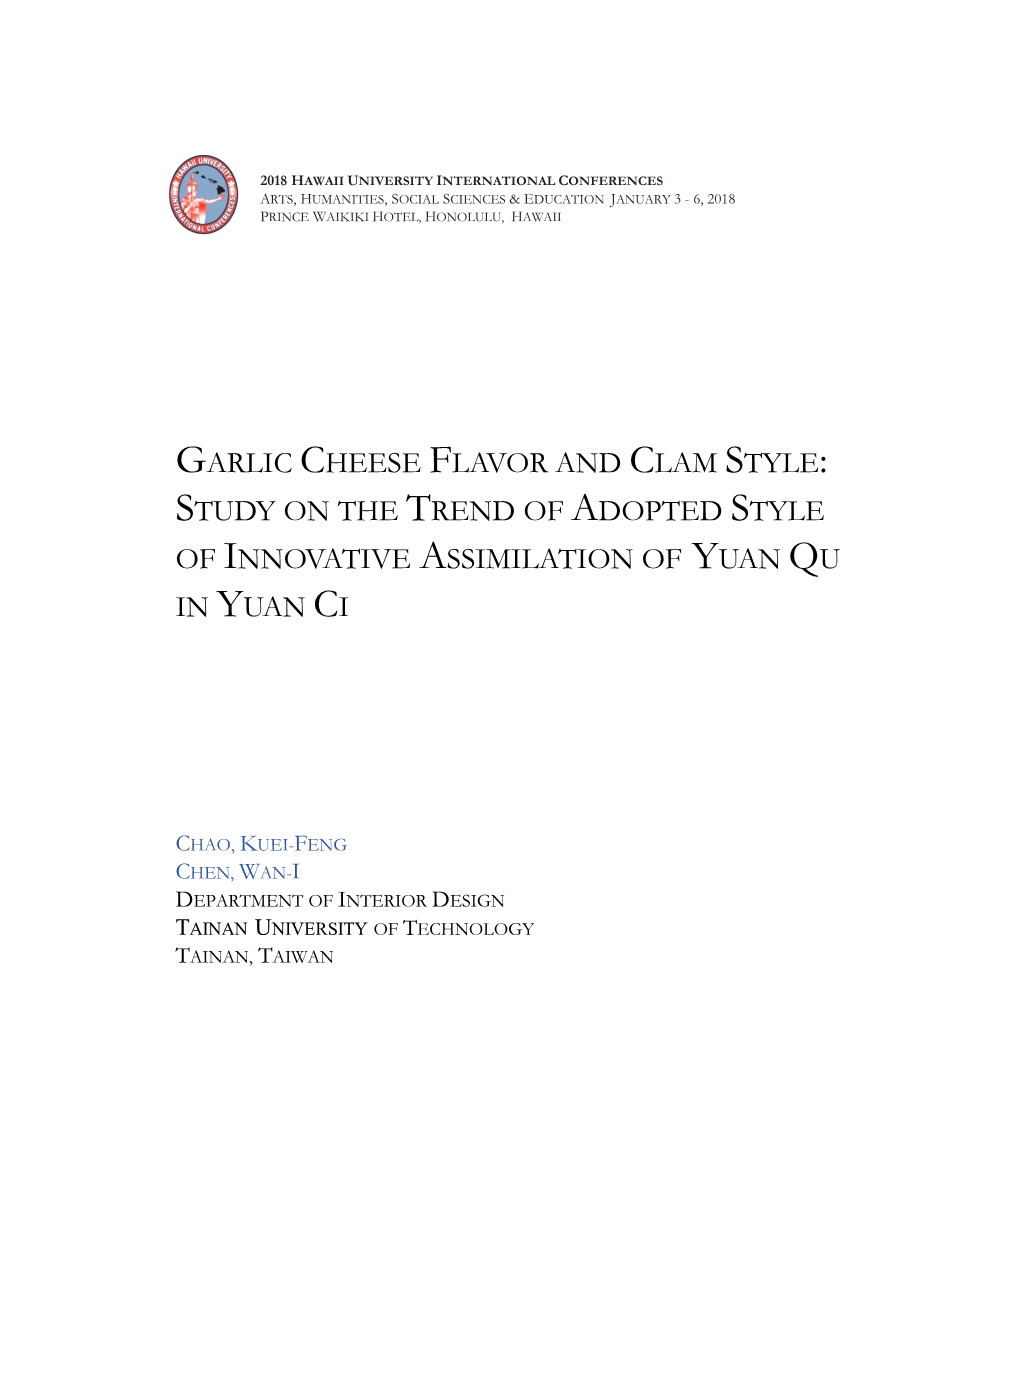 Garlic Cheese Flavor and Clam Style: Study on the Trend of Adopted Style of Innovative Assimilation of Yuan Qu in Yuan Ci